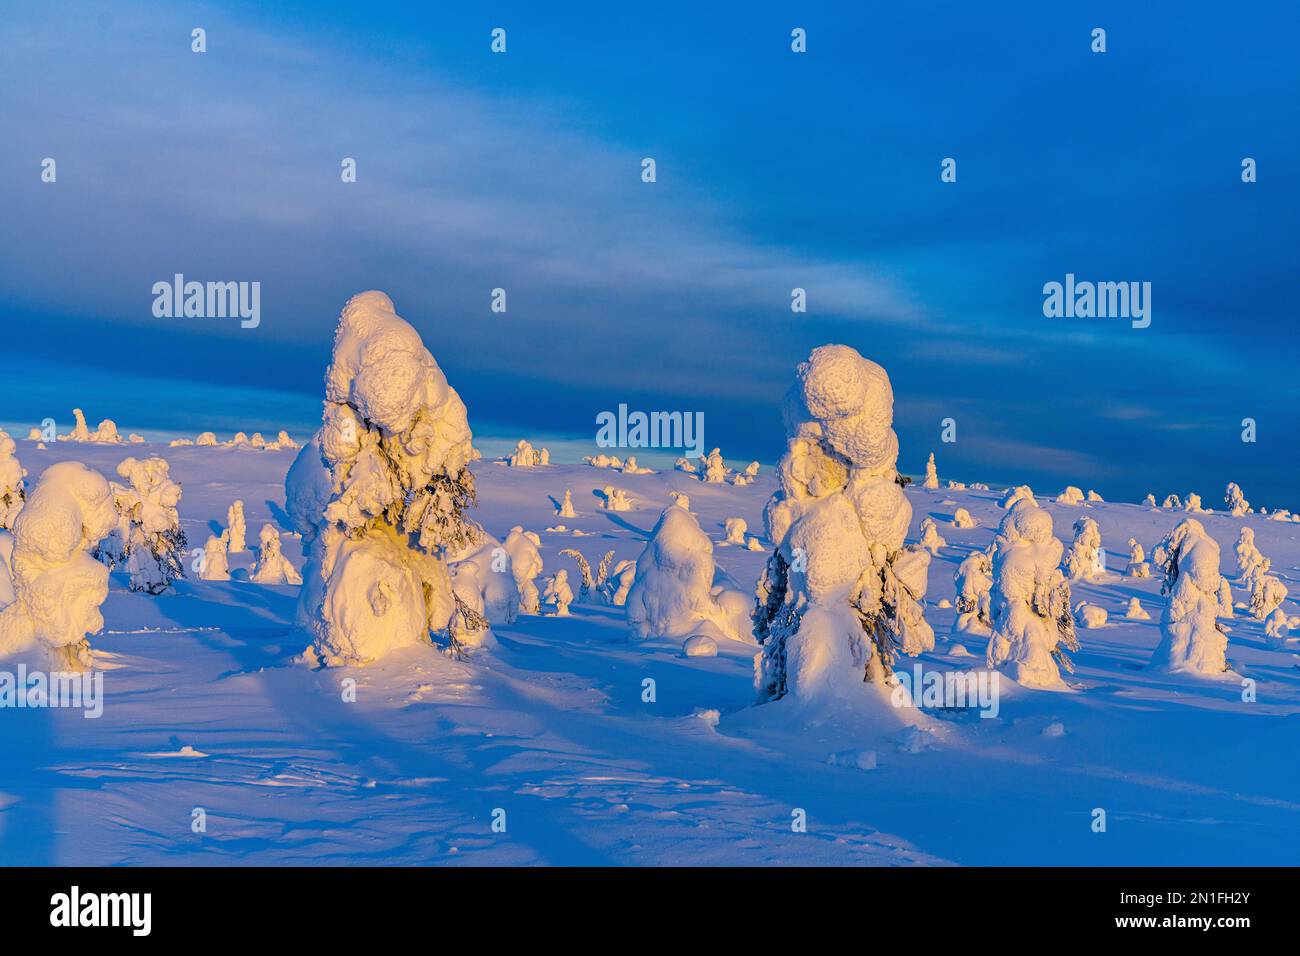 Ice sculptures in the snowy Arctic landscape, Riisitunturi National Park, Posio, Lapland, Finland, Europe Stock Photo